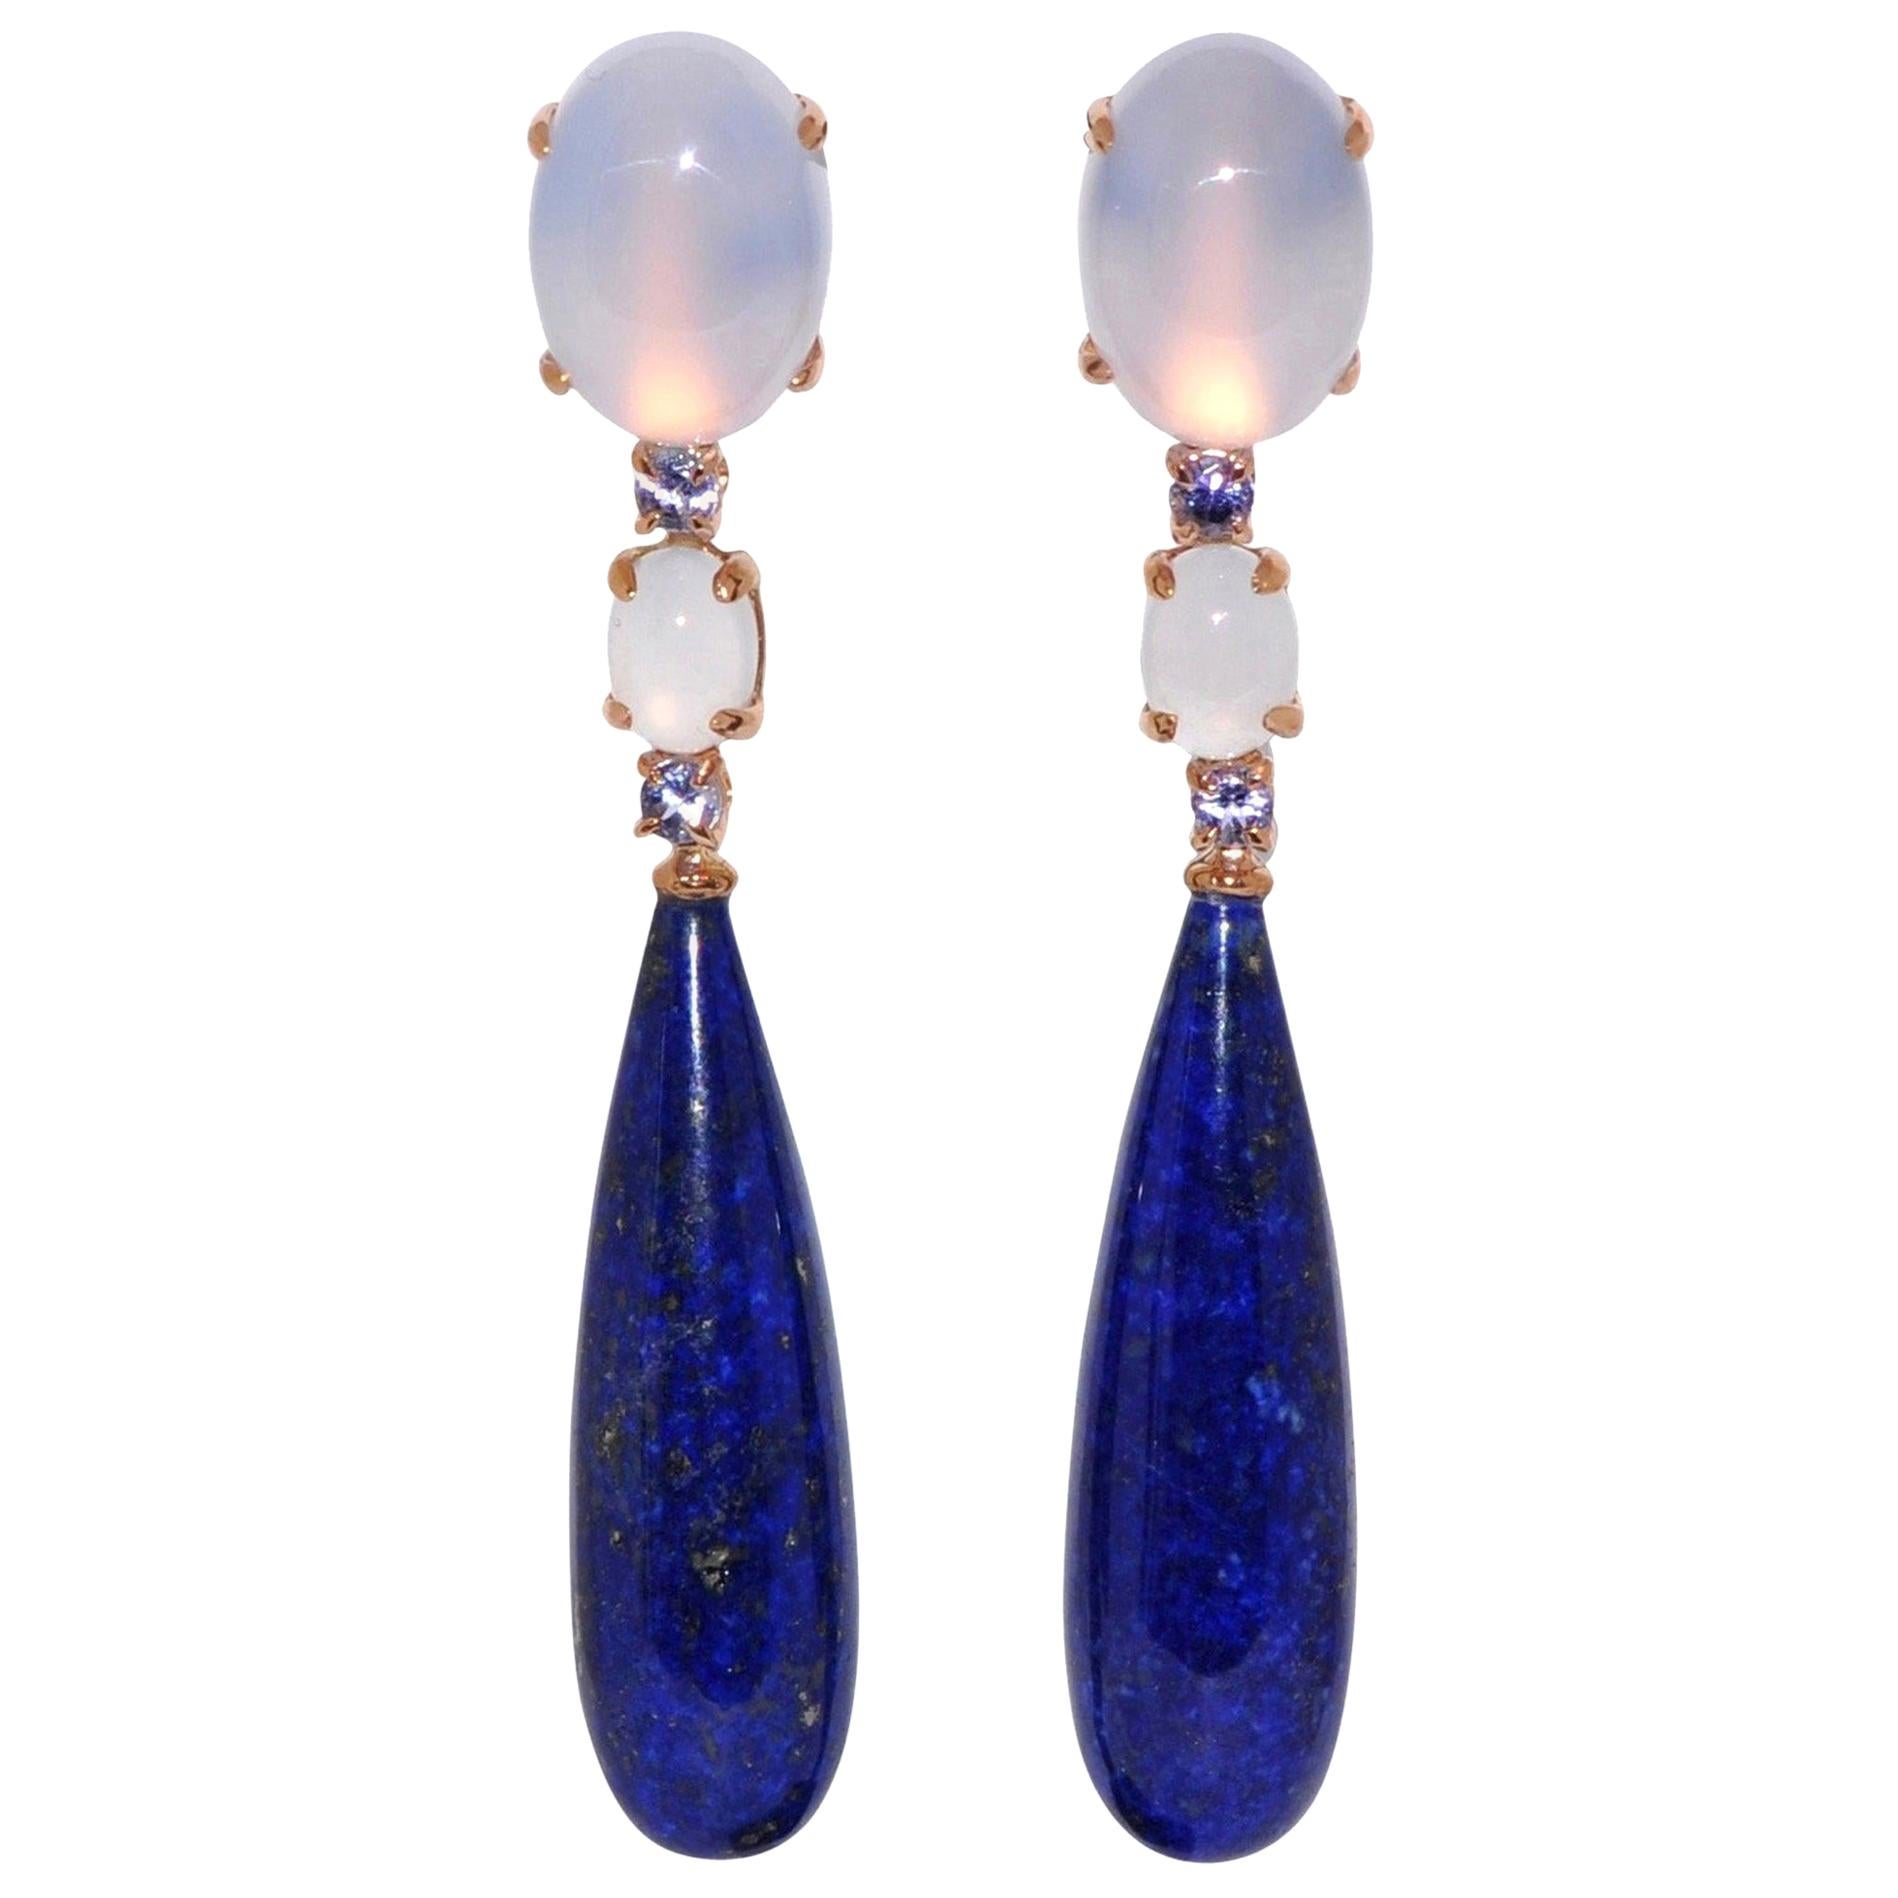 Lapis Lazuli, Chalcedony and Tanzanite Rose Gold Chandelier Earrings